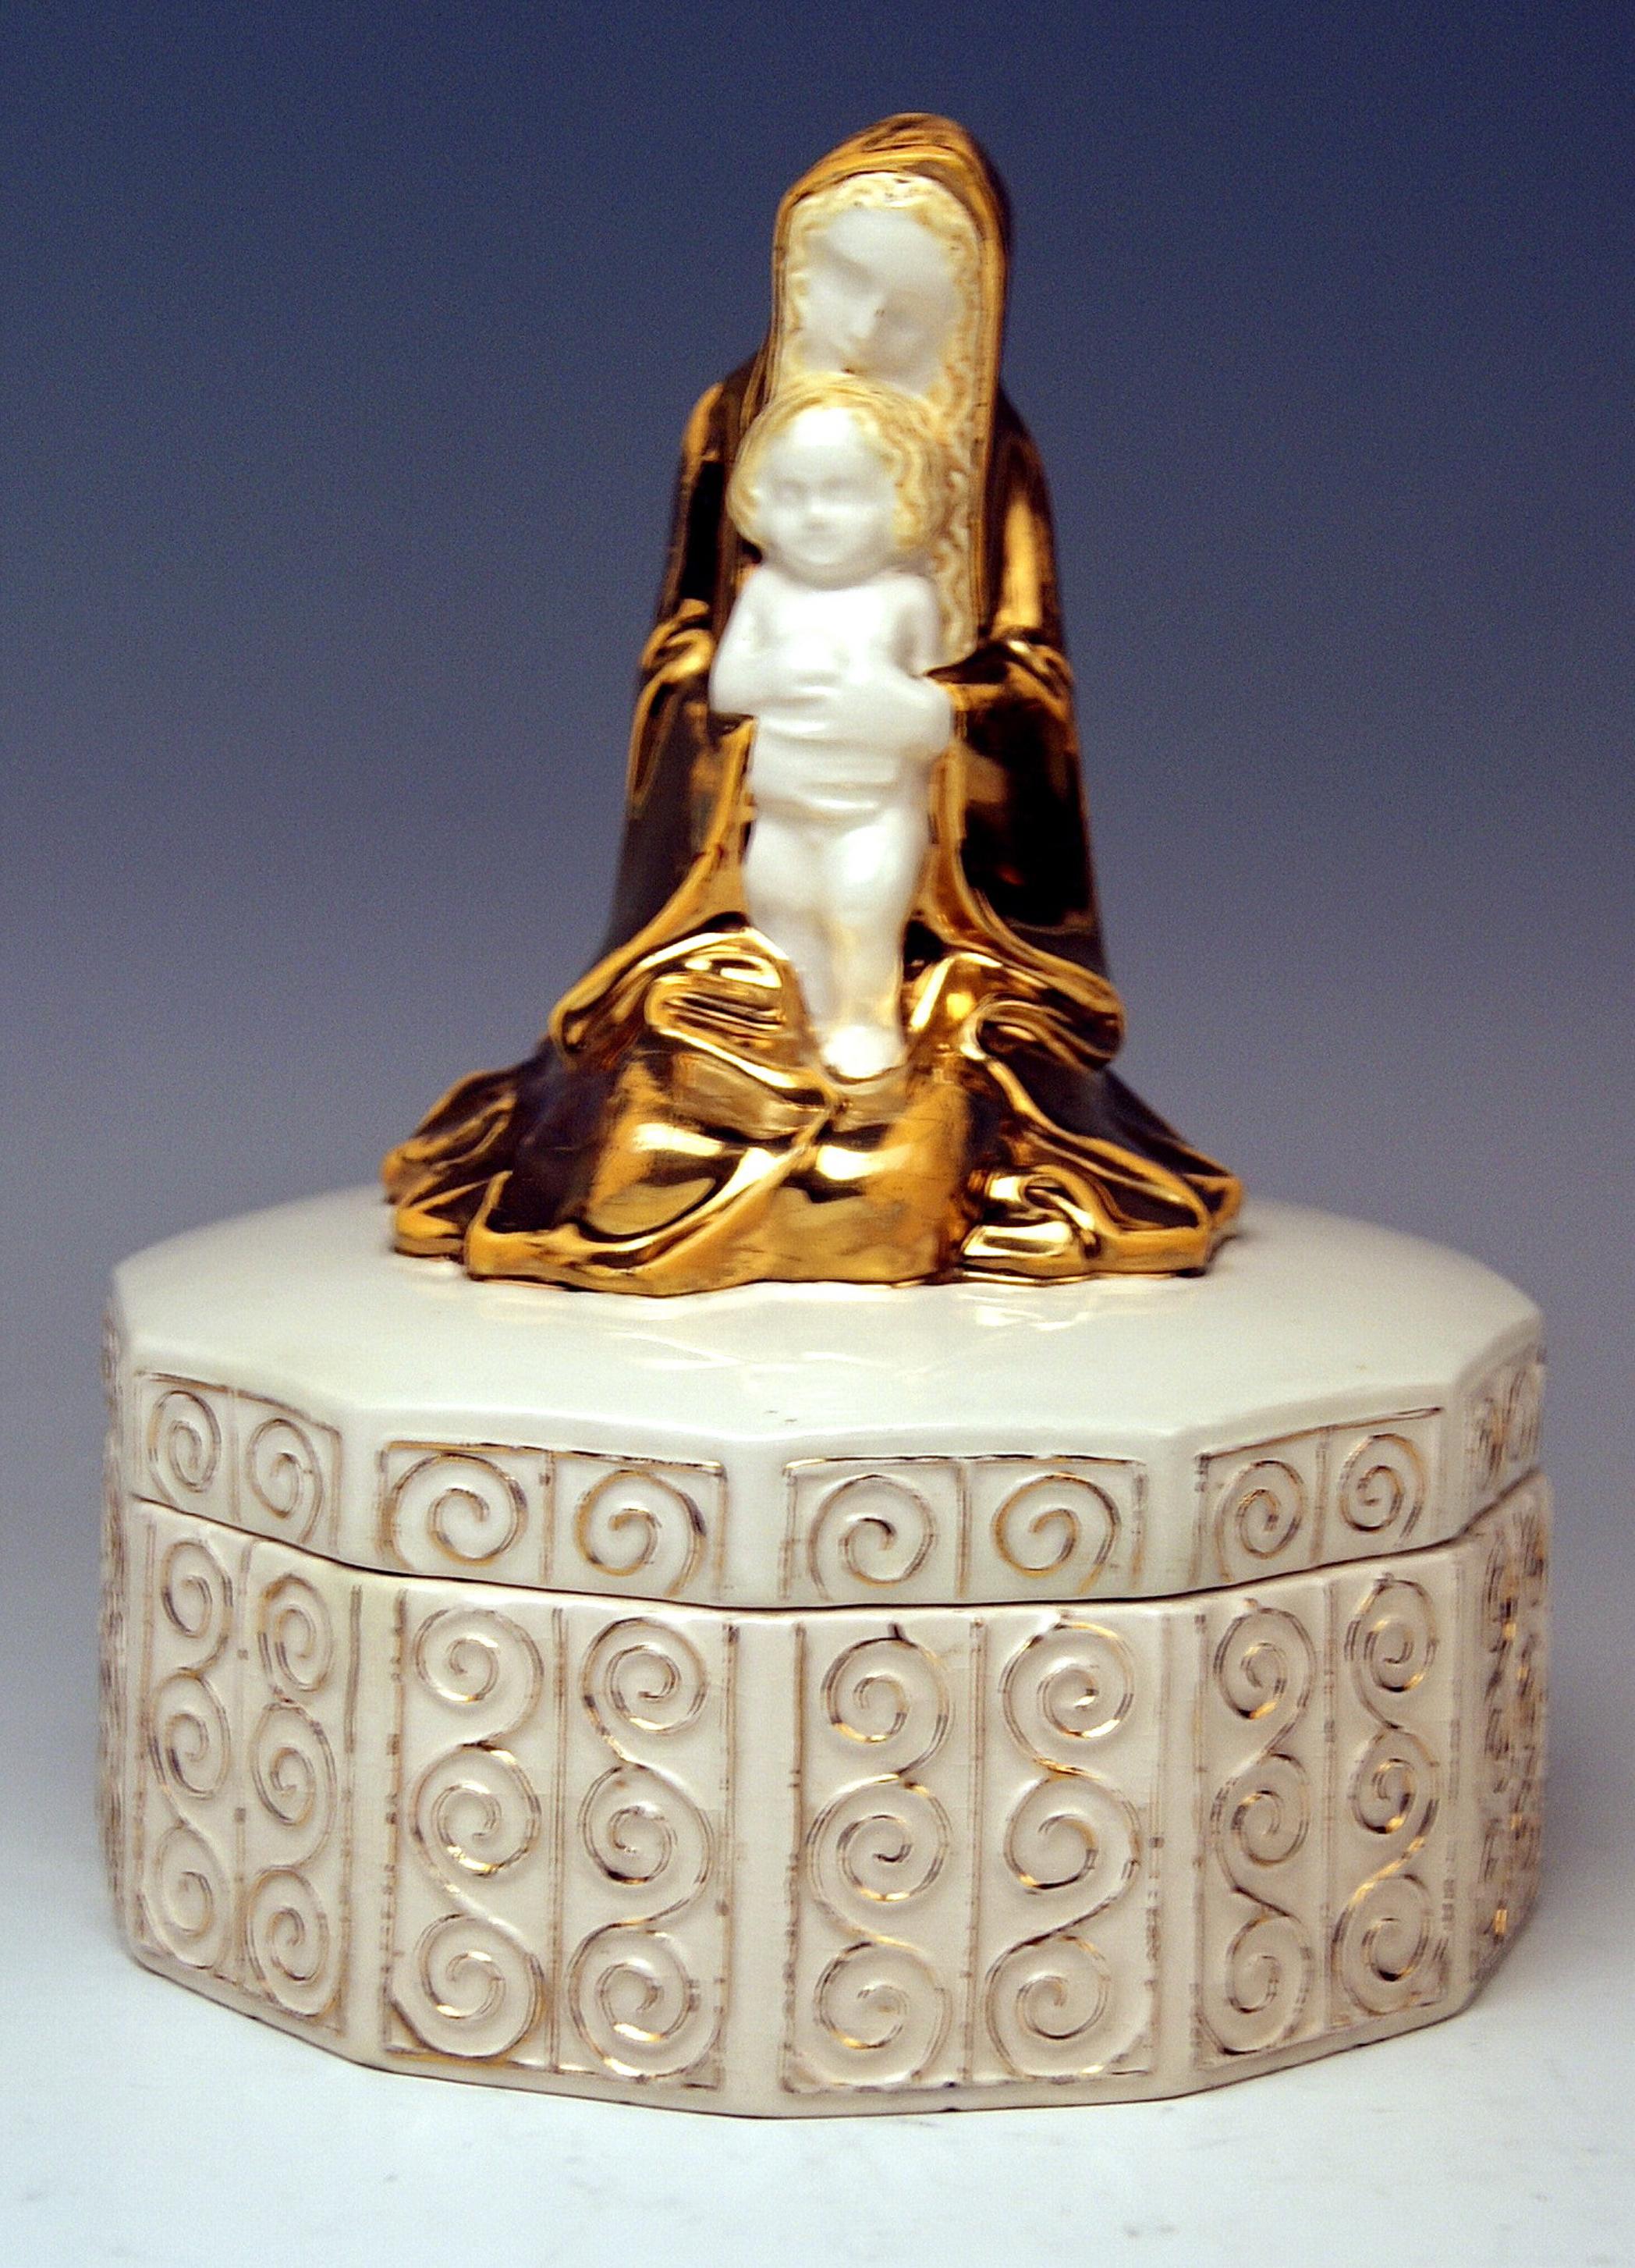 Michael Powolny excellent Art Nouveau item:
Virgin Mary with Jesus Child attached to twelve-sided box. It is a most lovely ceramics item, indeed  !
Modelled by Michael Powolny  1871 - 1954,   before 1910.

HALLMARKED:
Manufactured by Wiener Keramik: